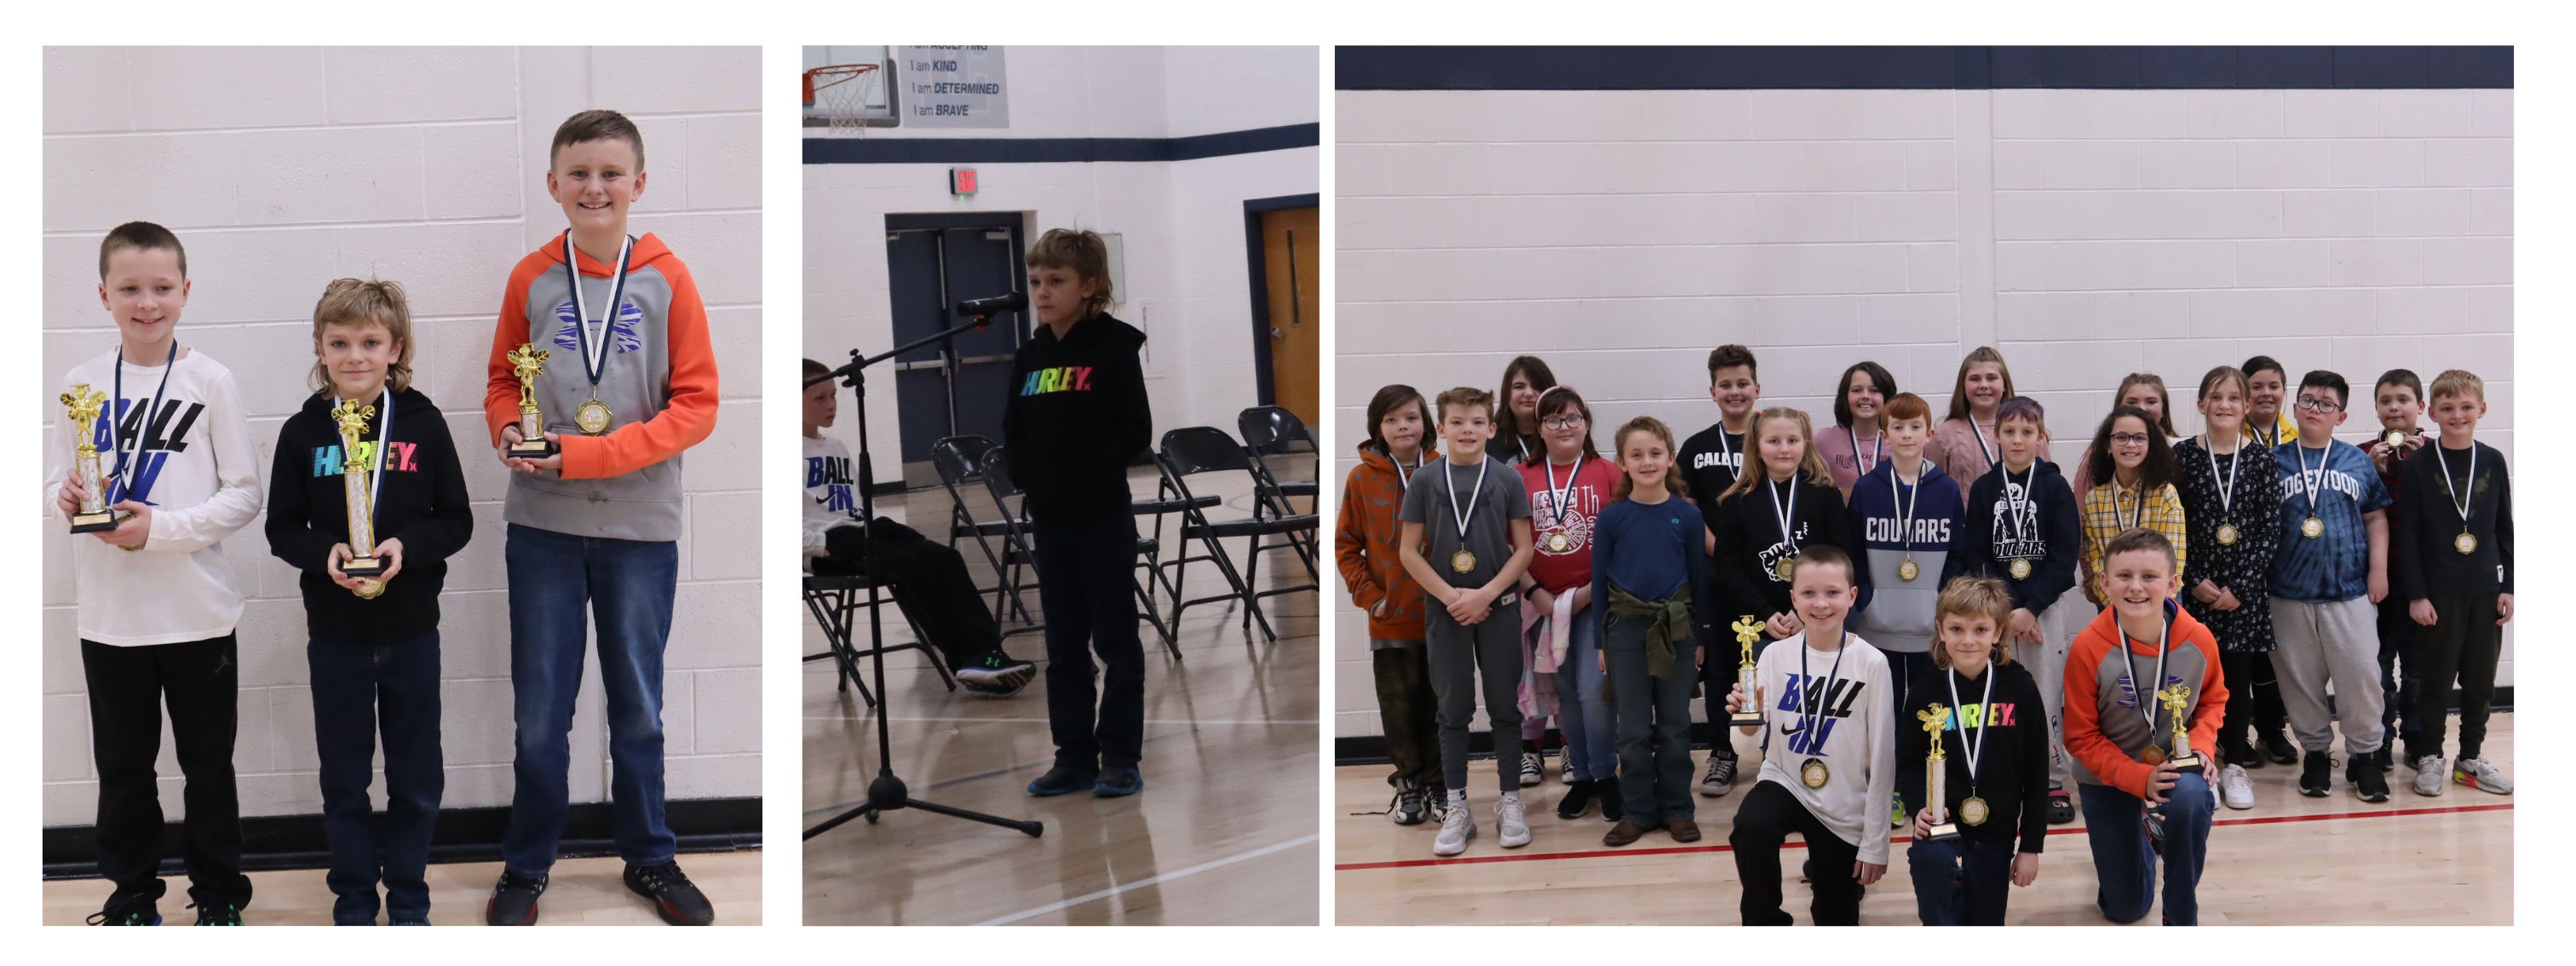 spelling bee winner and participants